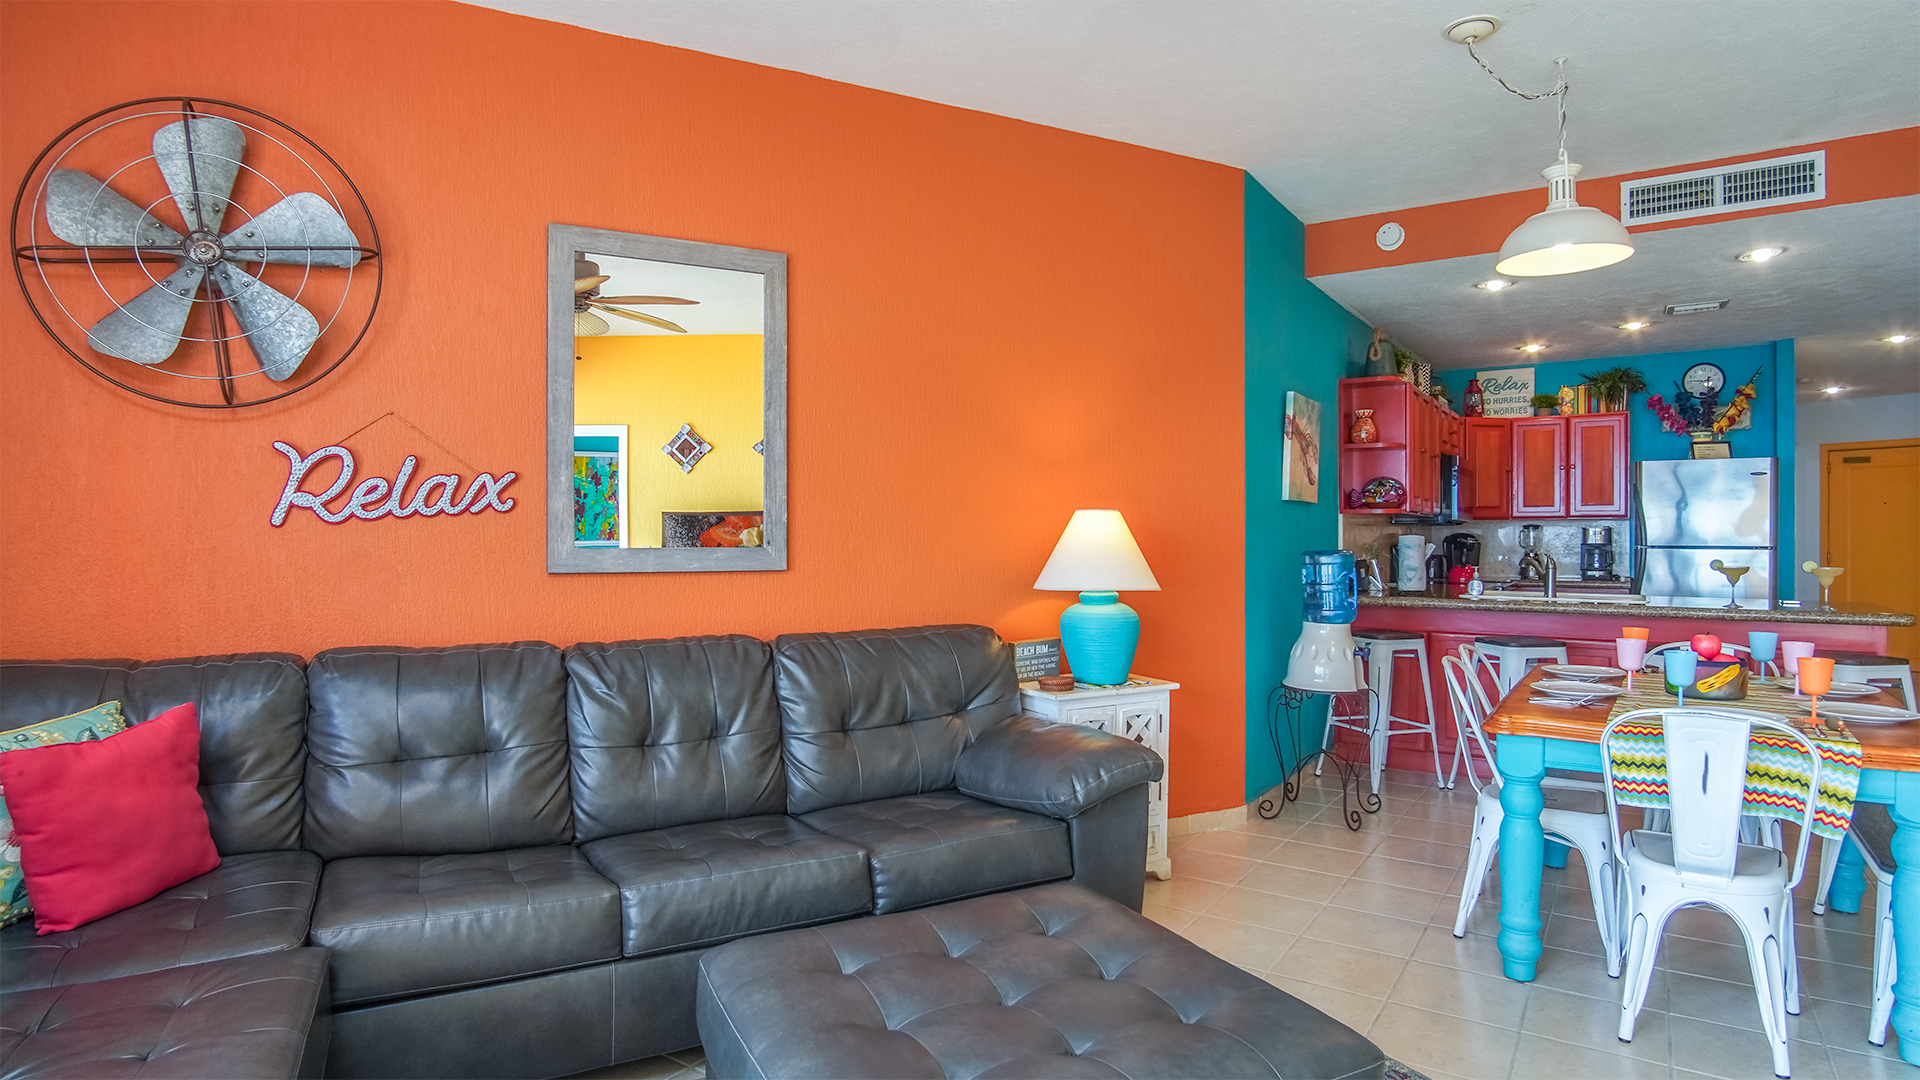 Boldly colorful, this is a fun two bedroom unit/